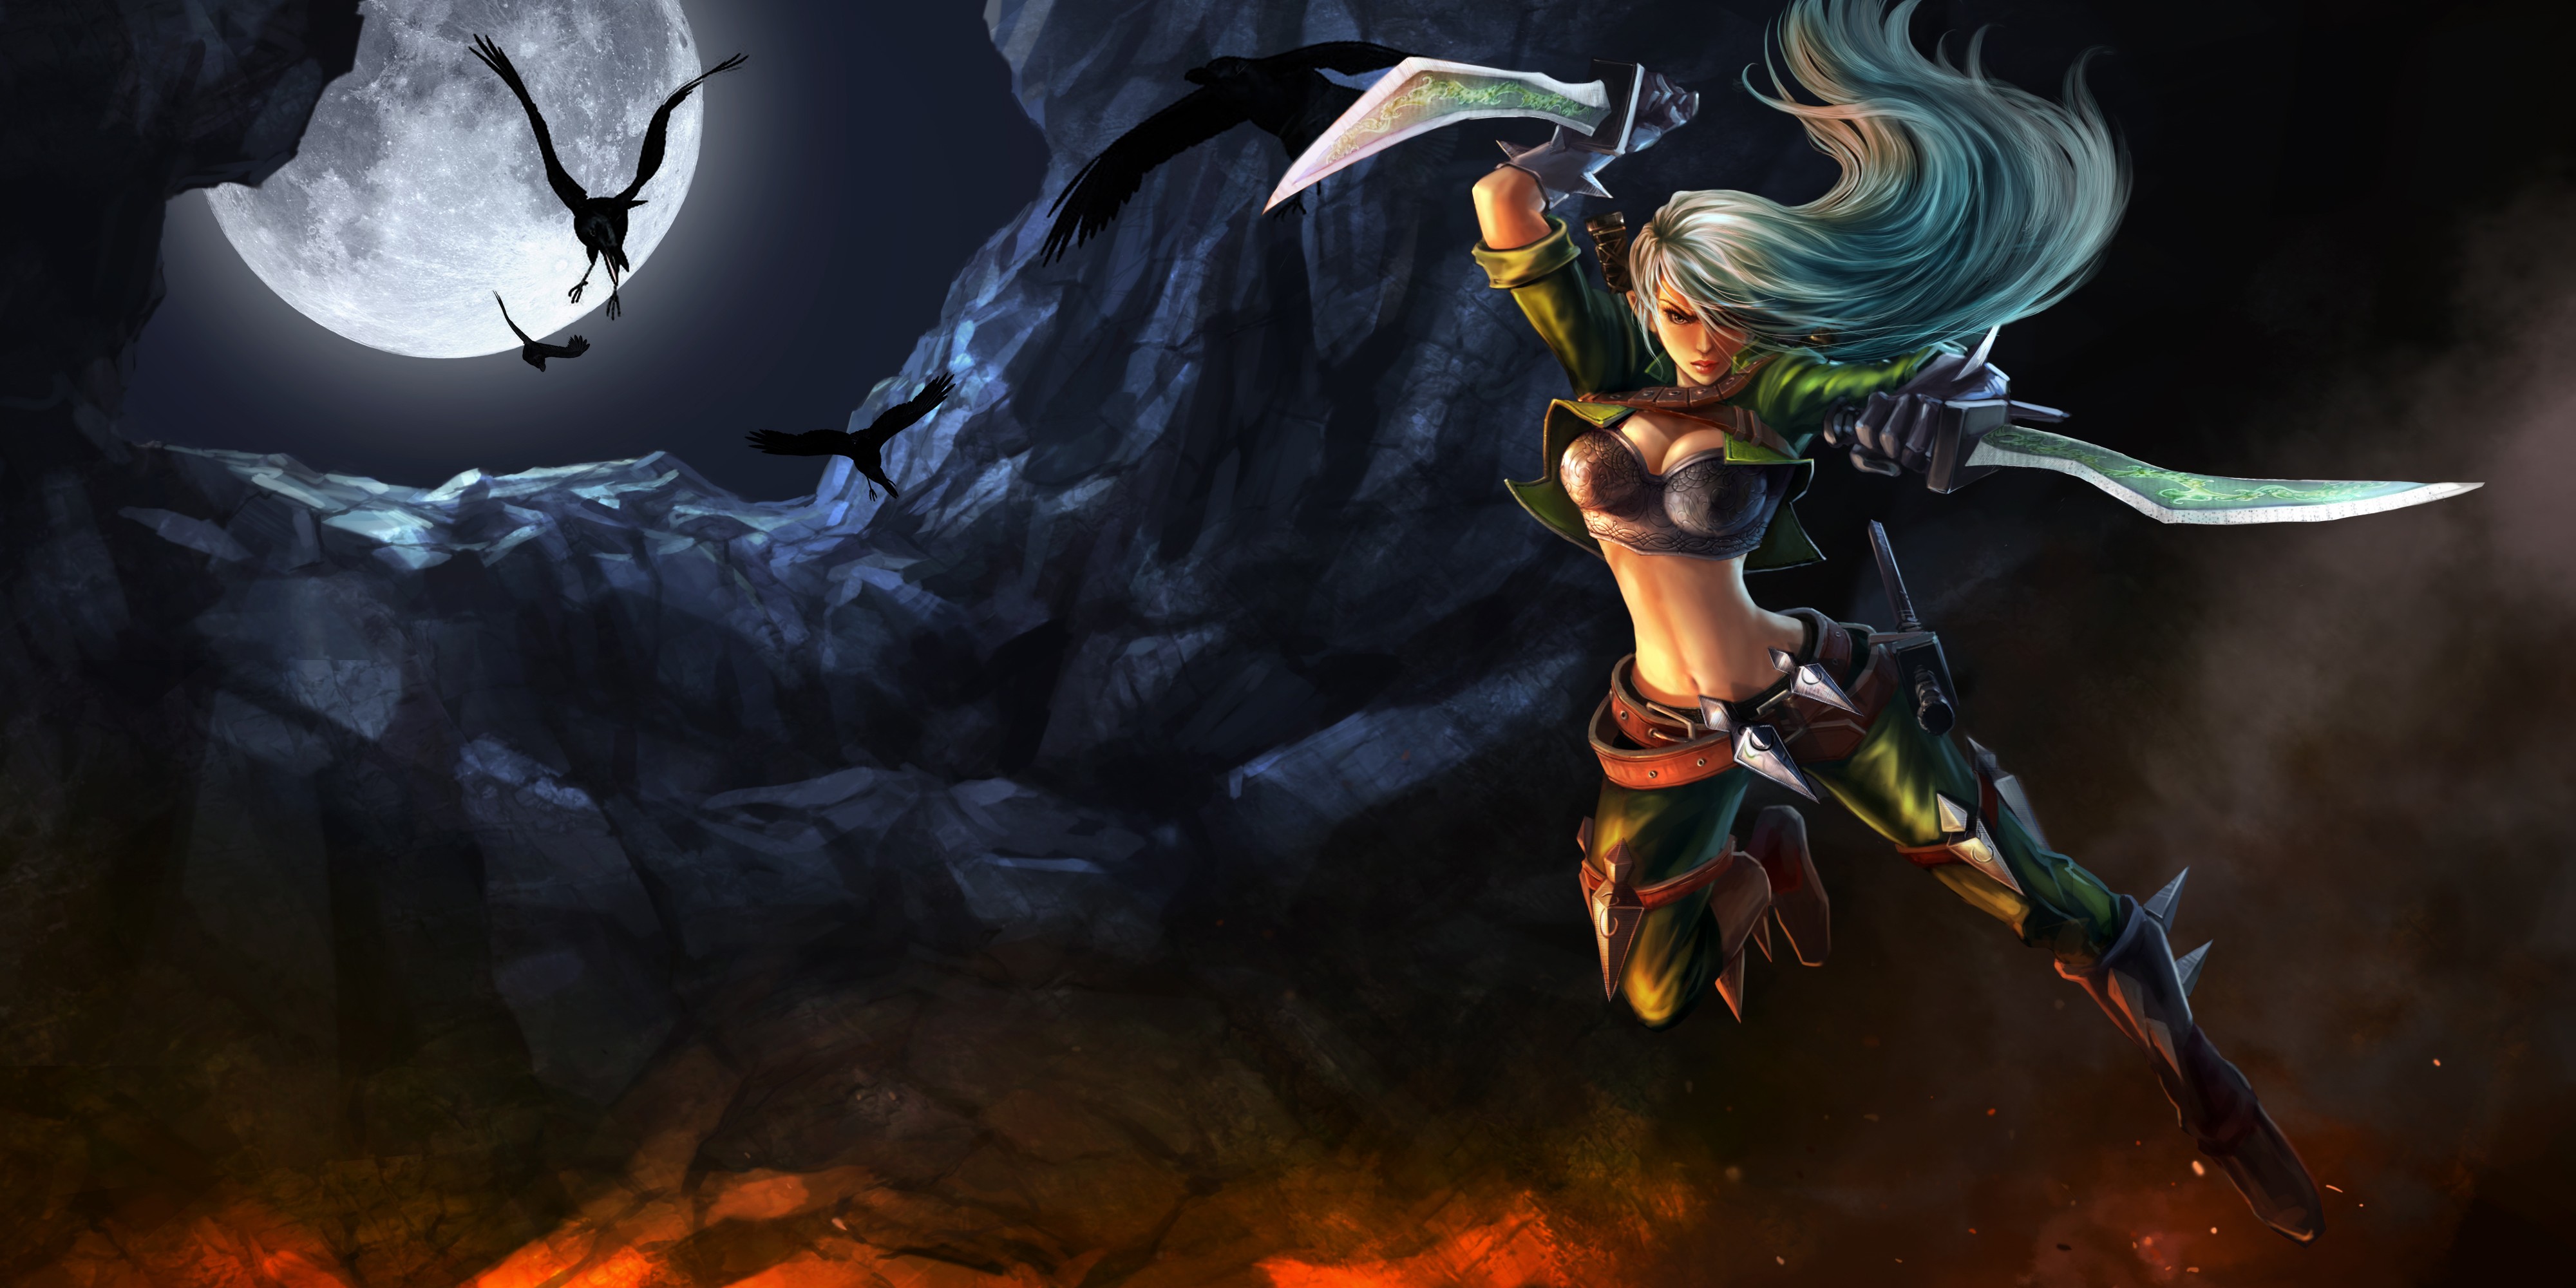 Anime 4000x2000 anime anime girls League of Legends armor cleavage raven Moon Katarina (League of Legends) video game girls boobs slim body fantasy art fantasy girl long hair women with swords girls with guns hair in face bra video game characters PC gaming